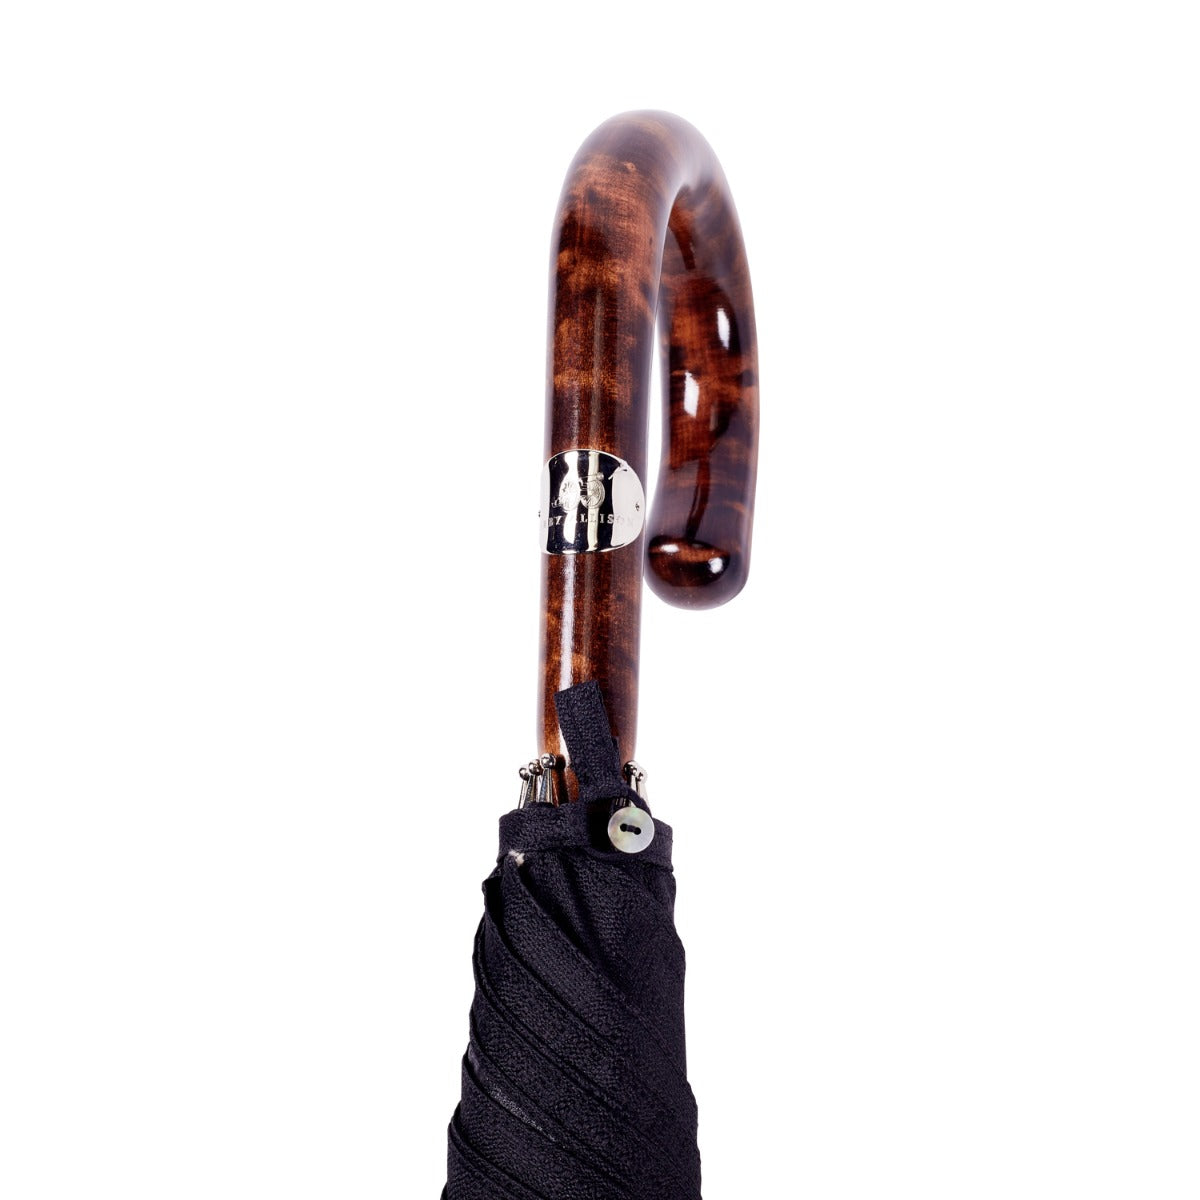 A Shiny Tiger Maple Handle w/ Imperial Black Canopy umbrella from KirbyAllison.com.